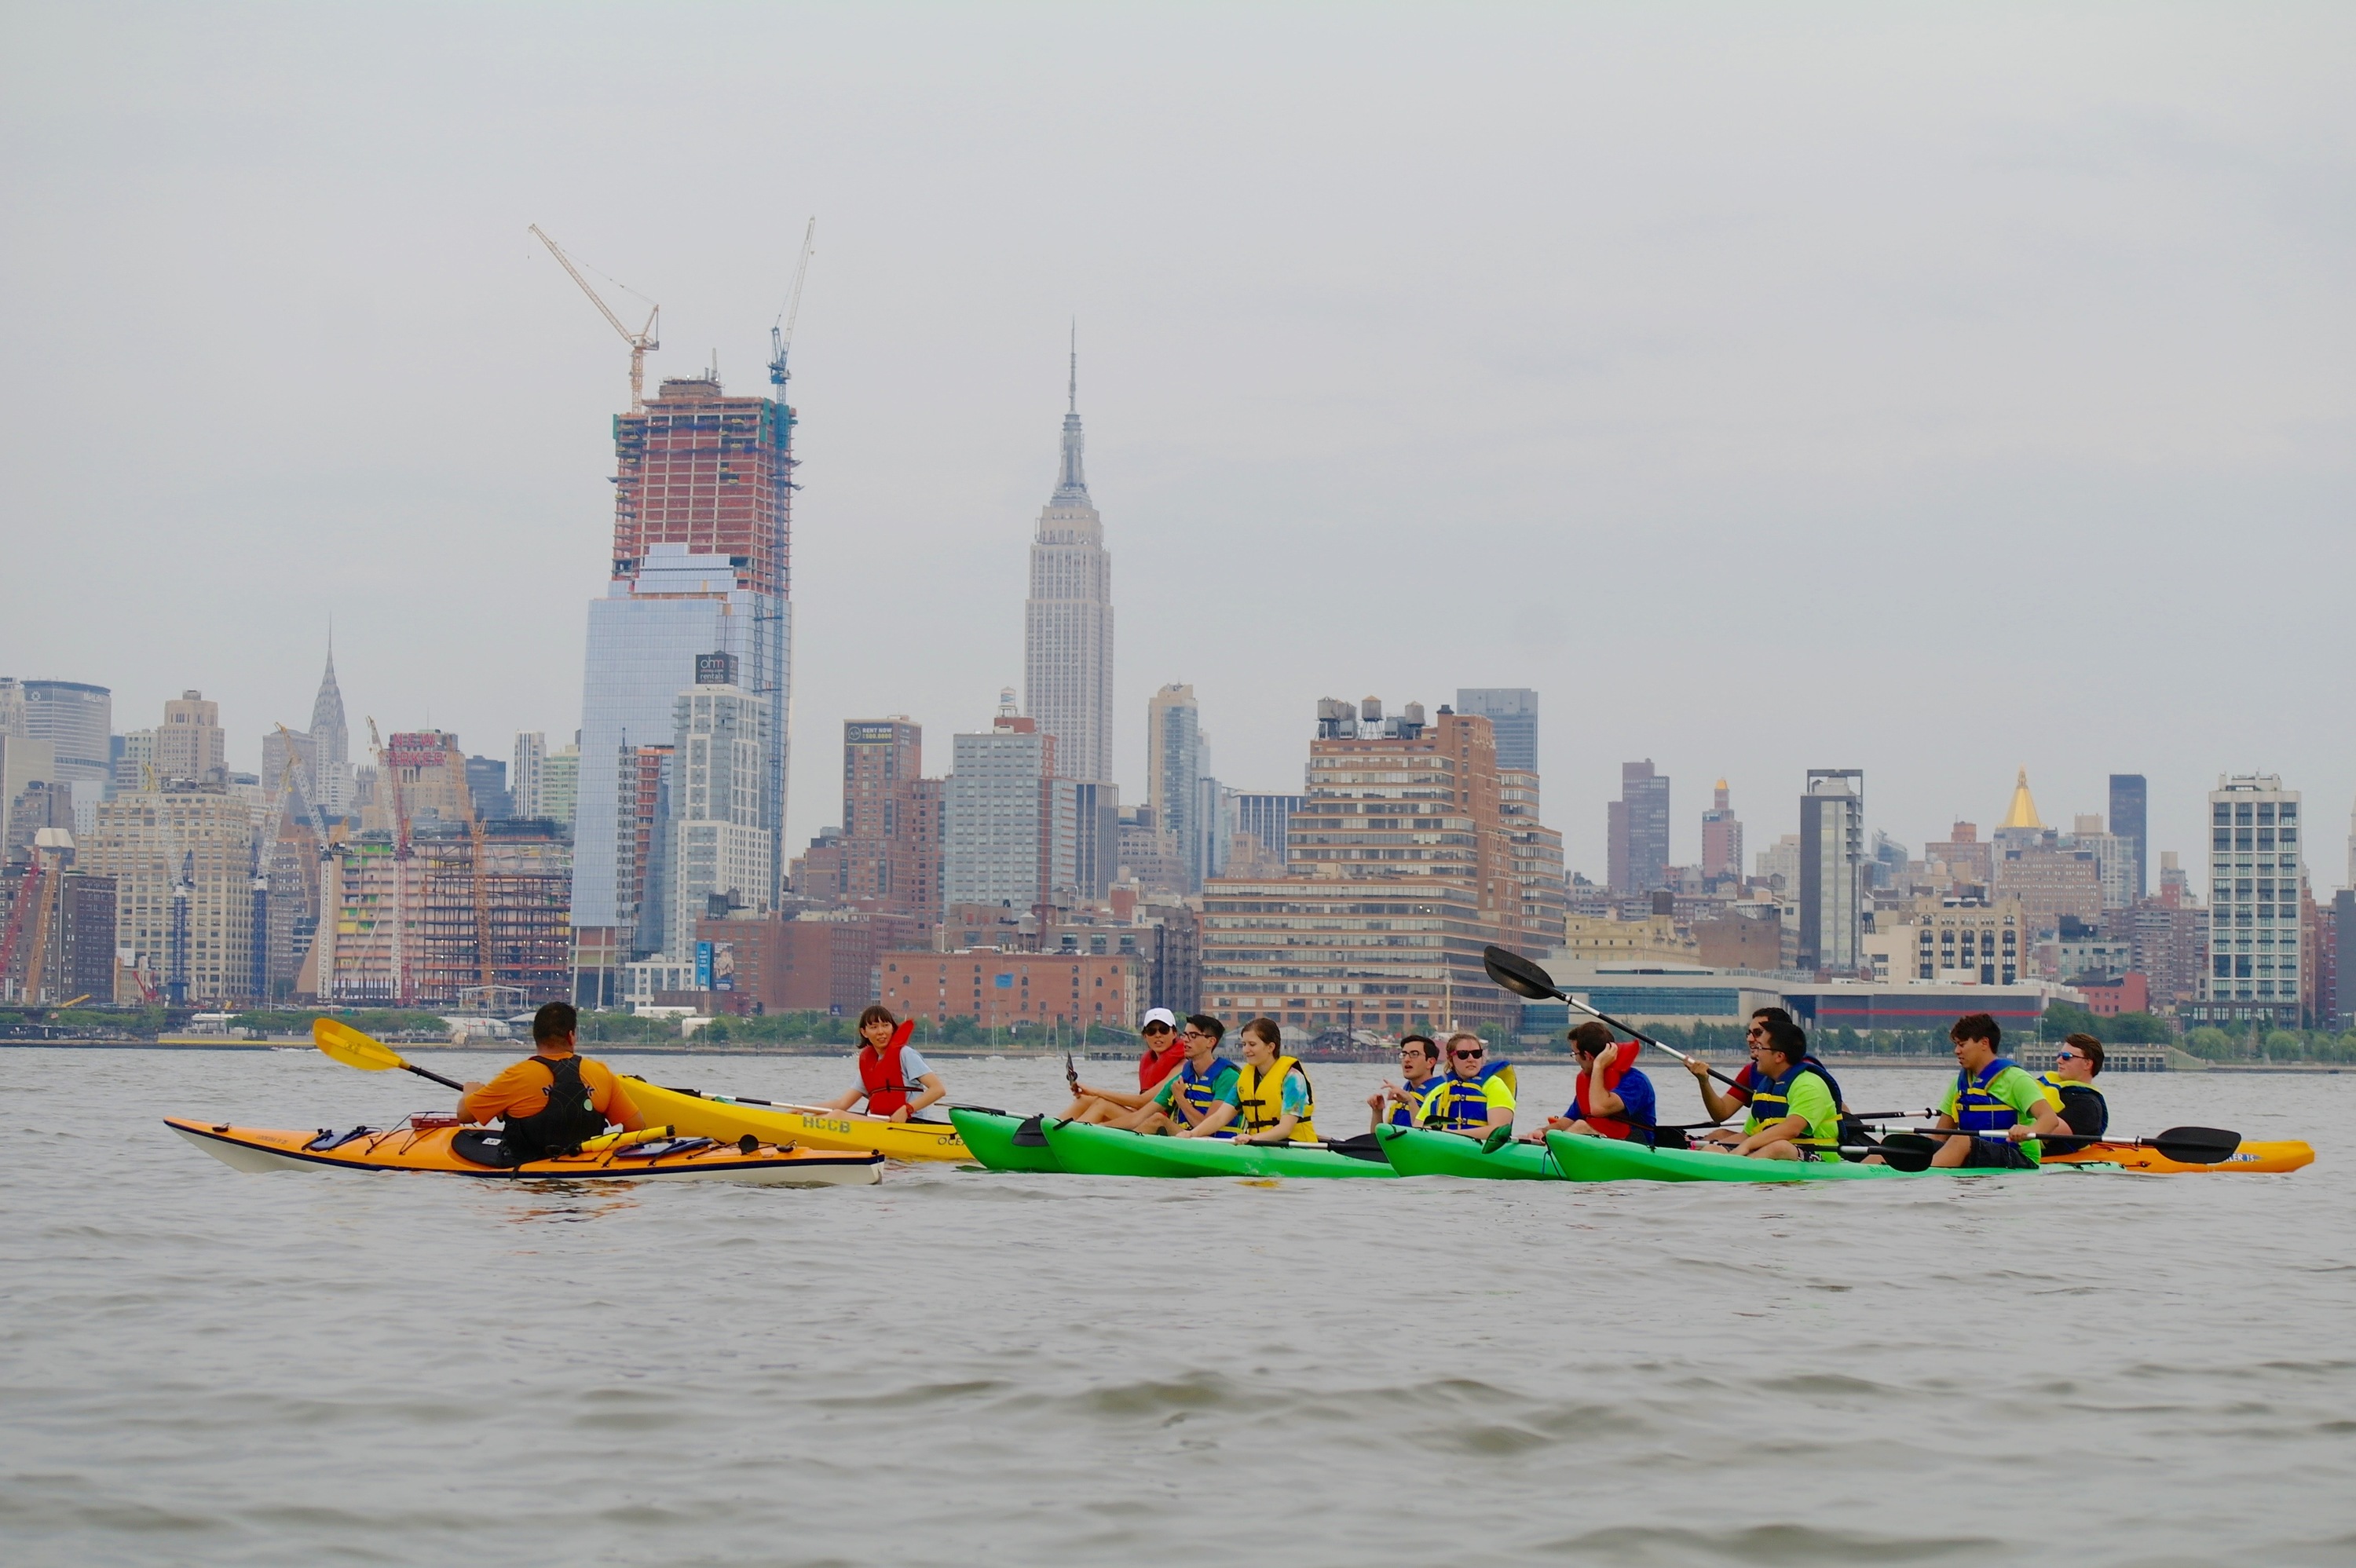 Free kayaking in NYC offering the best views of the city's skyline